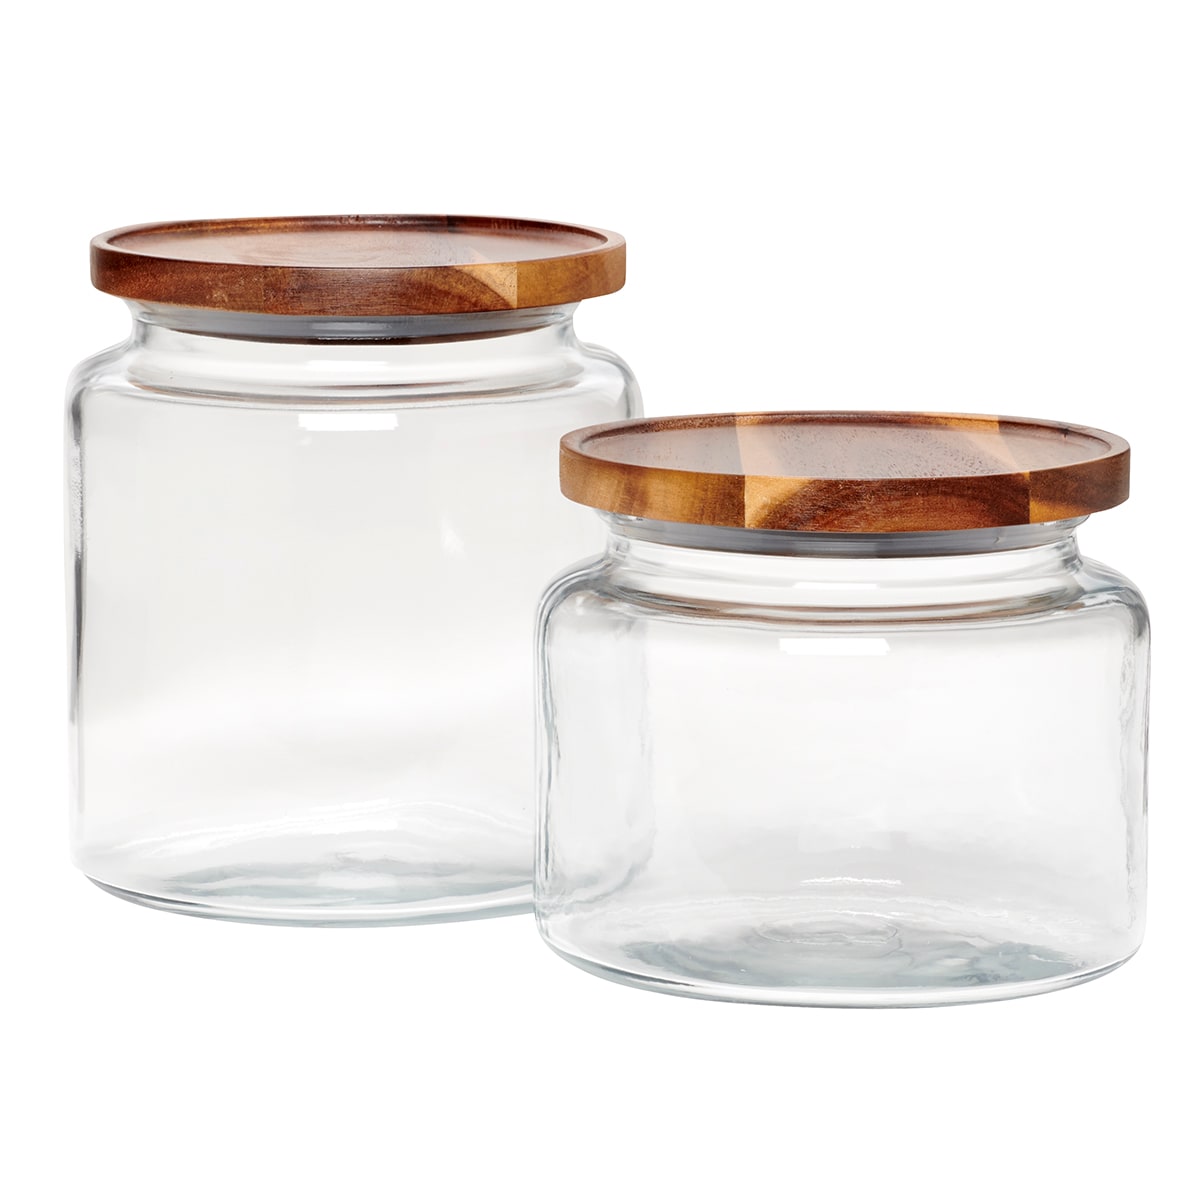 1 1/2 Quart Anchor Square Jar with Bamboo Lid